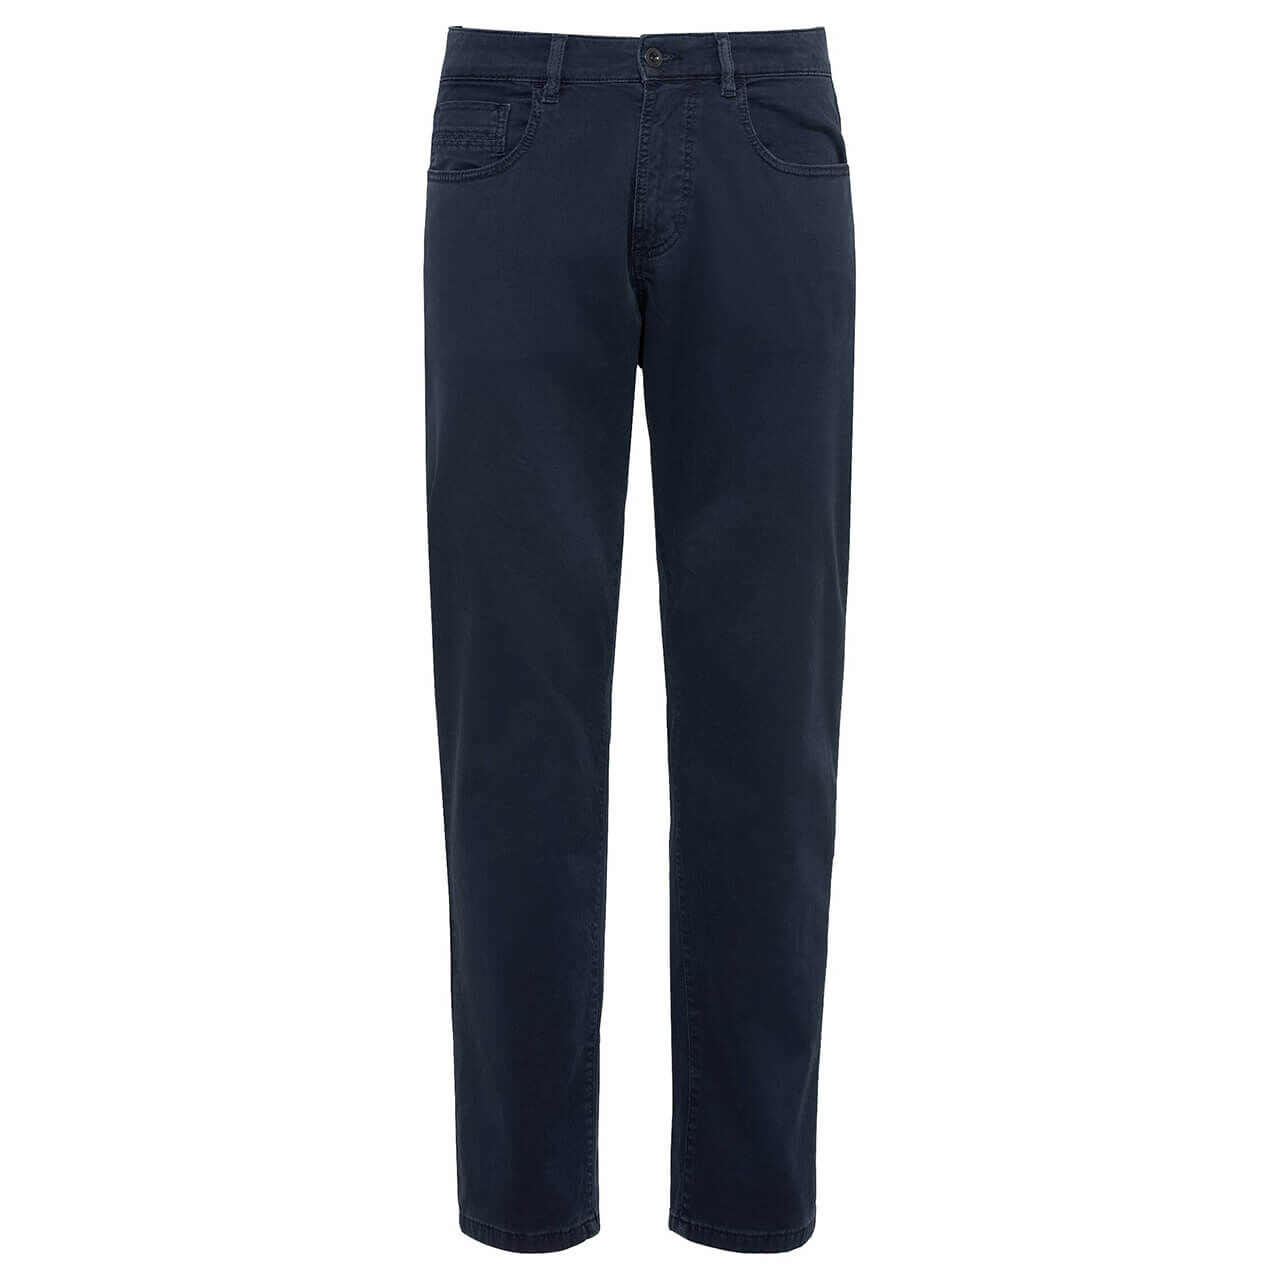 Camel active Woodstock Jeans night blue